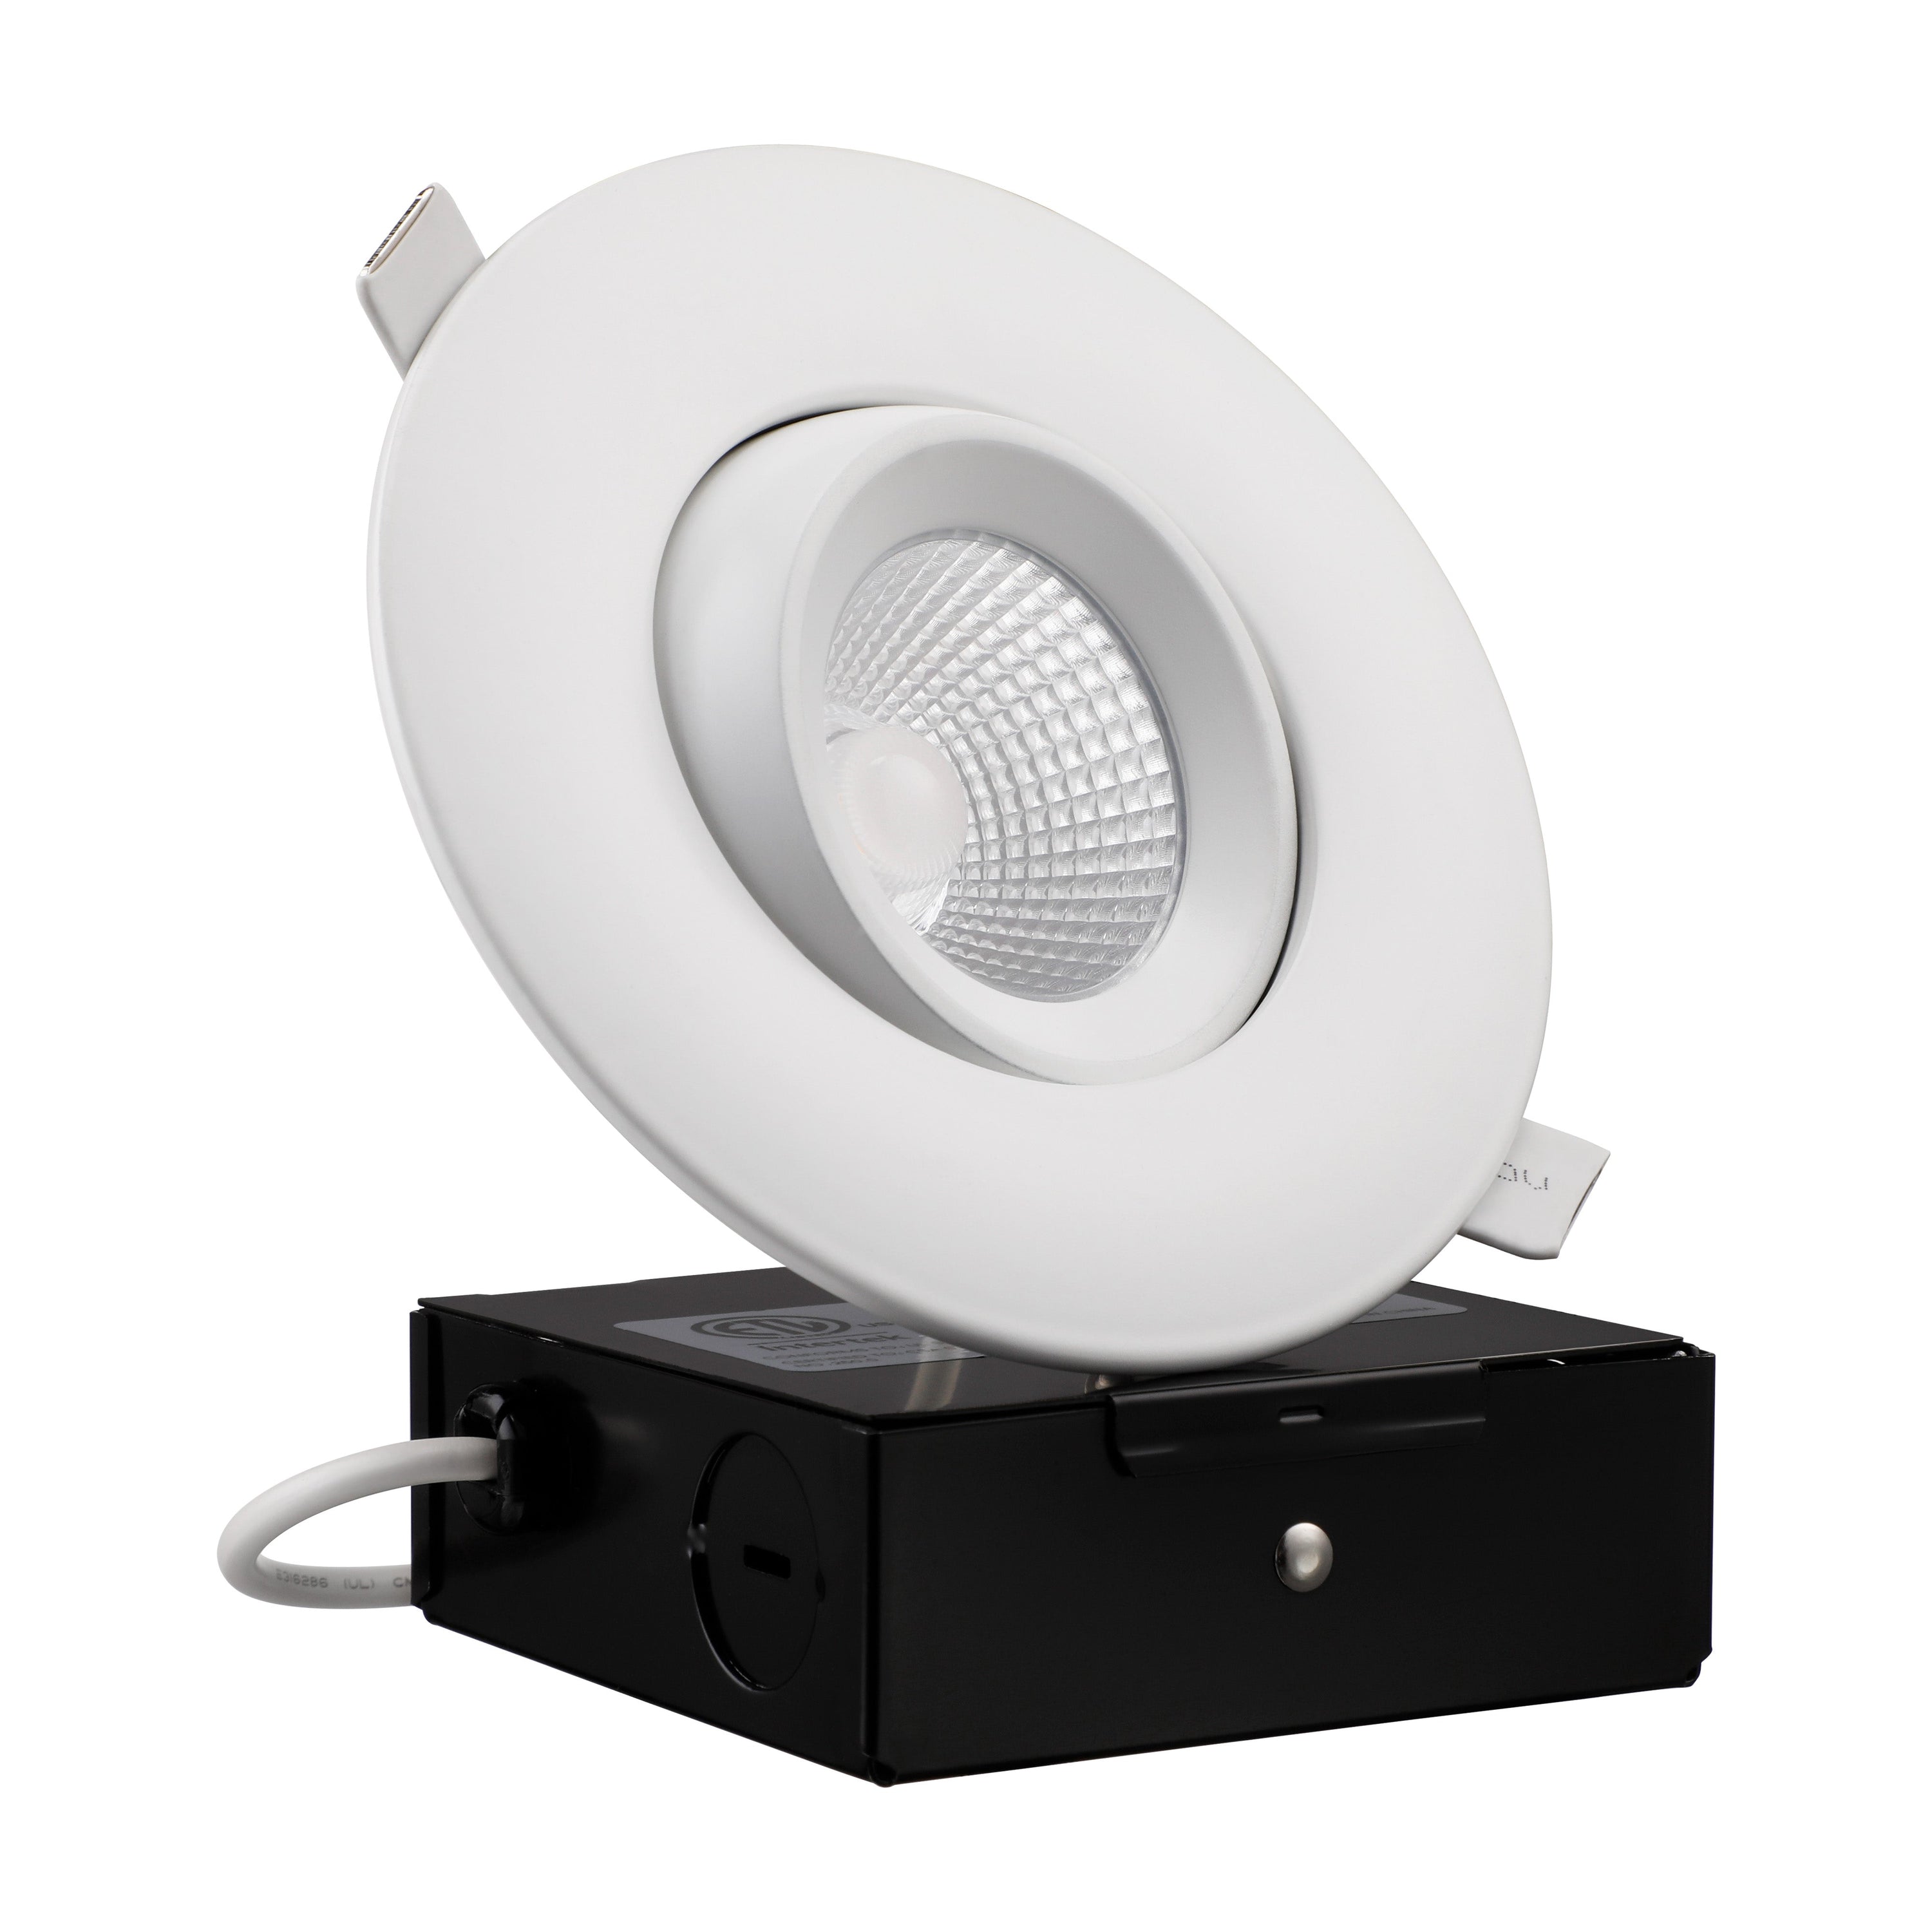 TORCHSTAR Rotatolux 4" Gimbal Canless LED Recessed Light - DL 12W Dimmable with Narrow Beam Angle